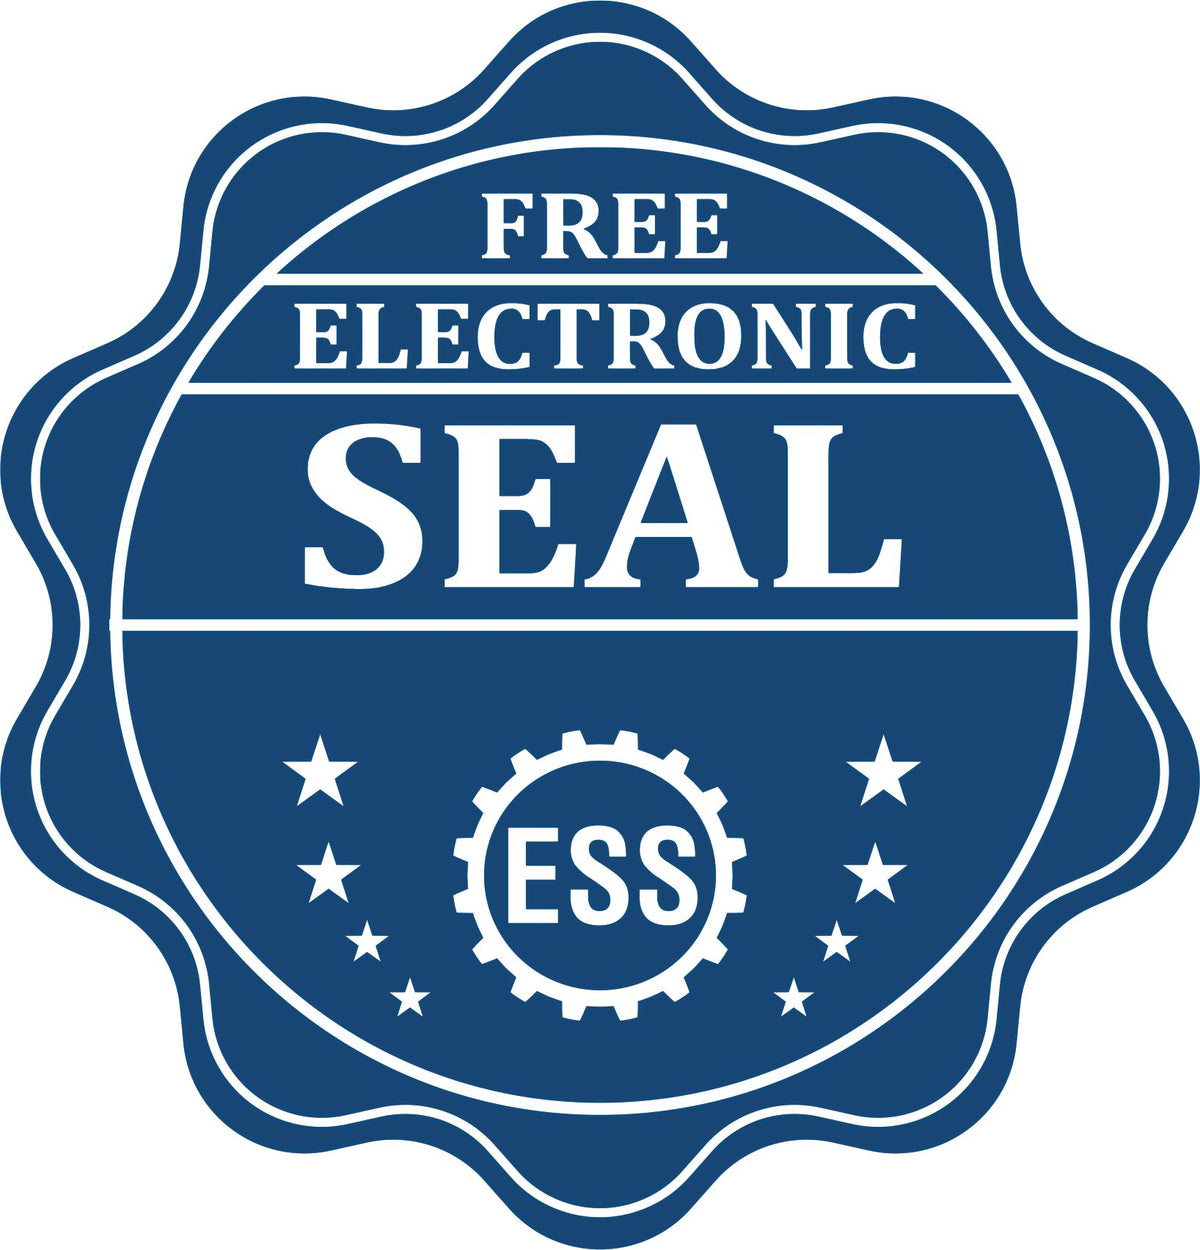 A badge showing a free electronic seal for the Long Reach Georgia Geology Seal with stars and the ESS gear on the emblem.